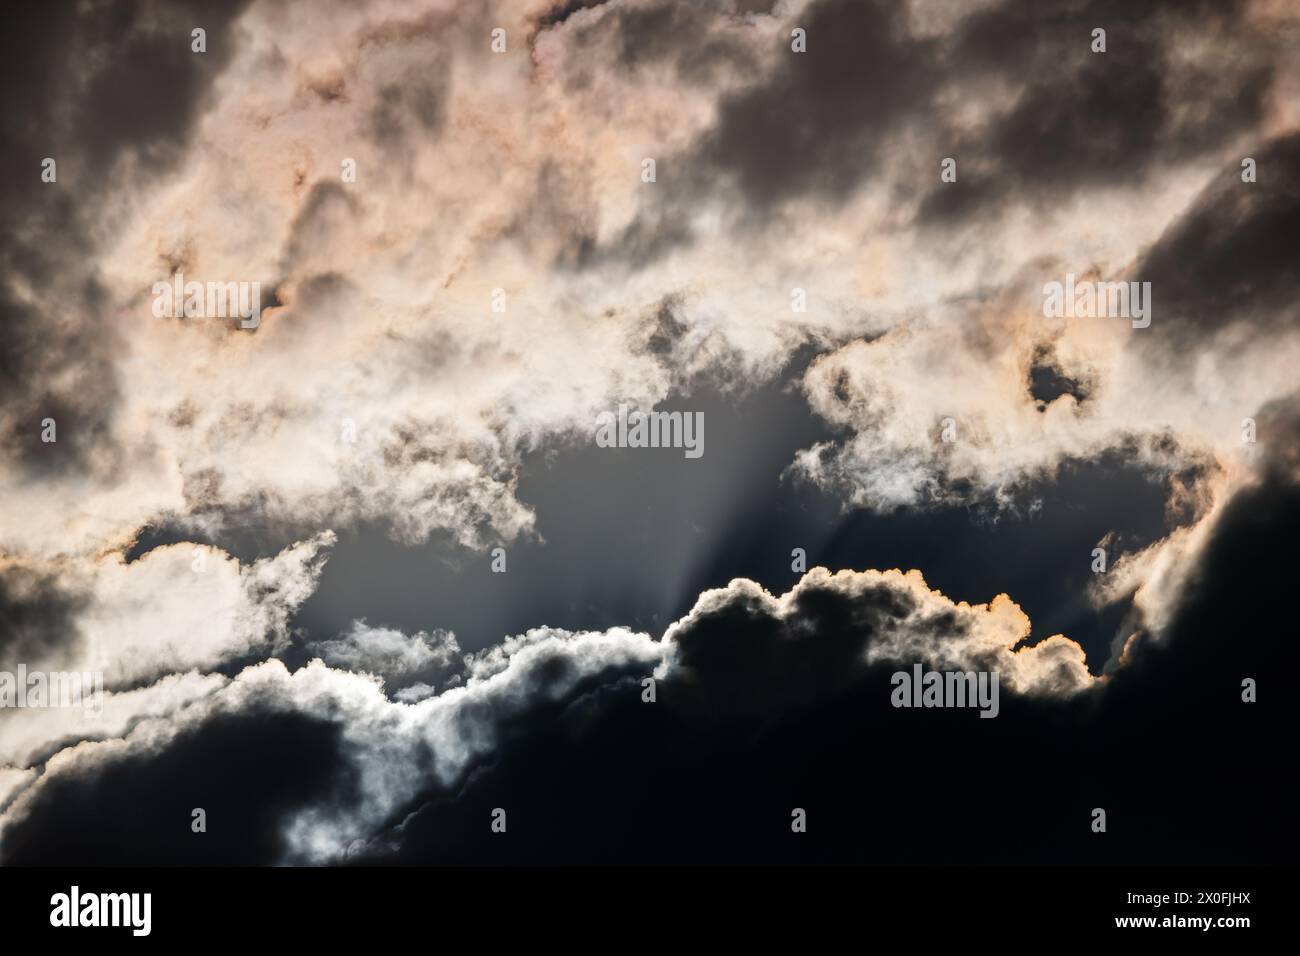 Iridescent clouds in Alhambra, Ciudad Real, Spain. Stock Photo